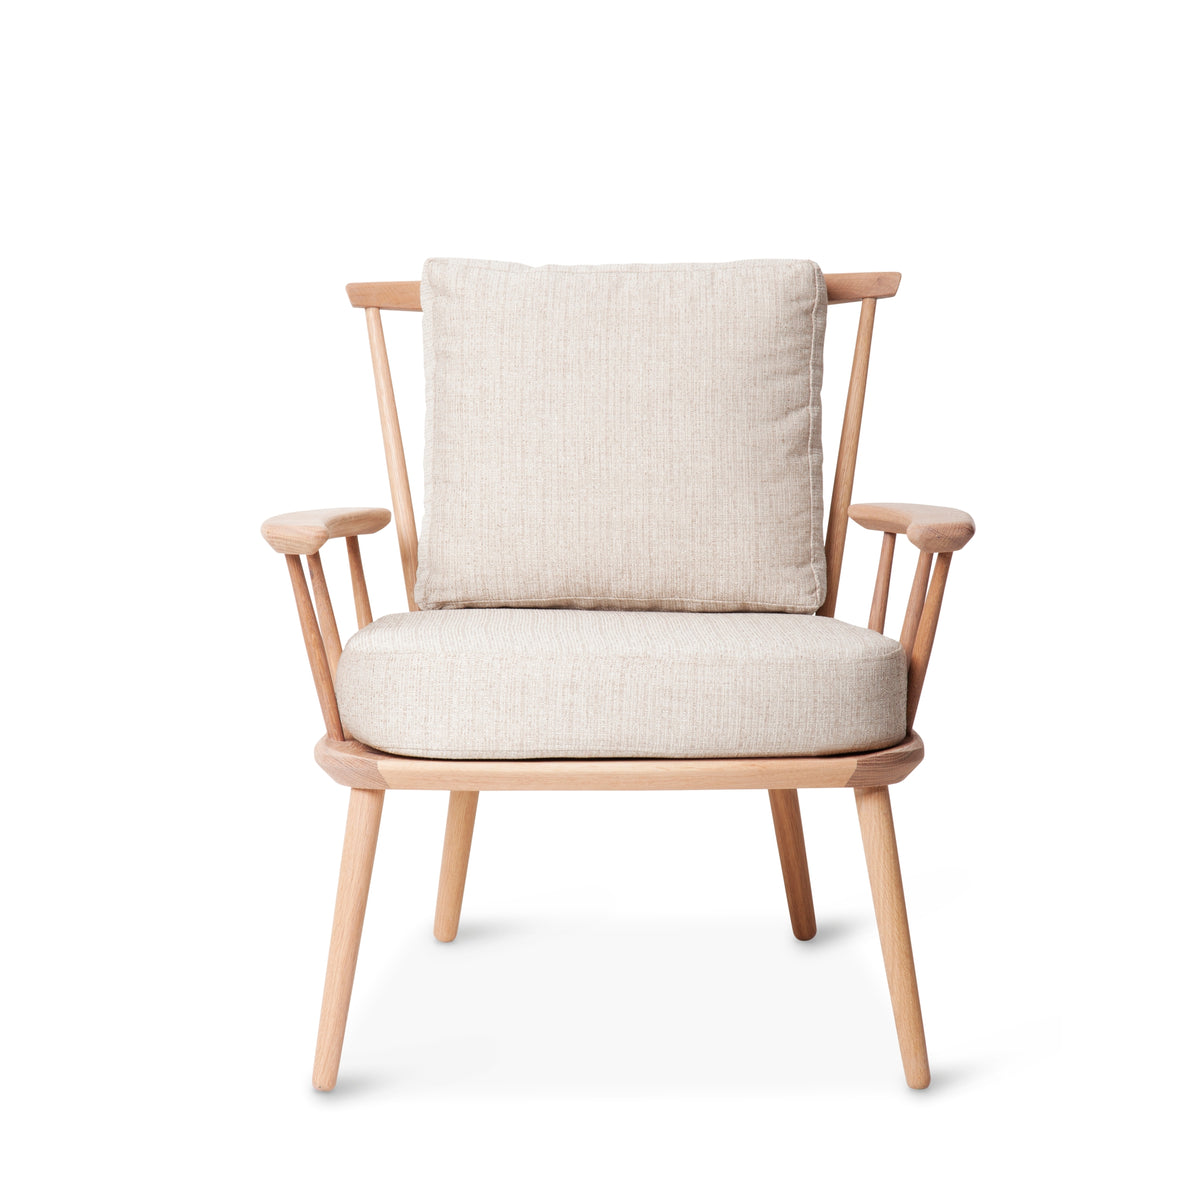 Arm Chair by Houtlander - Always Welcome Store